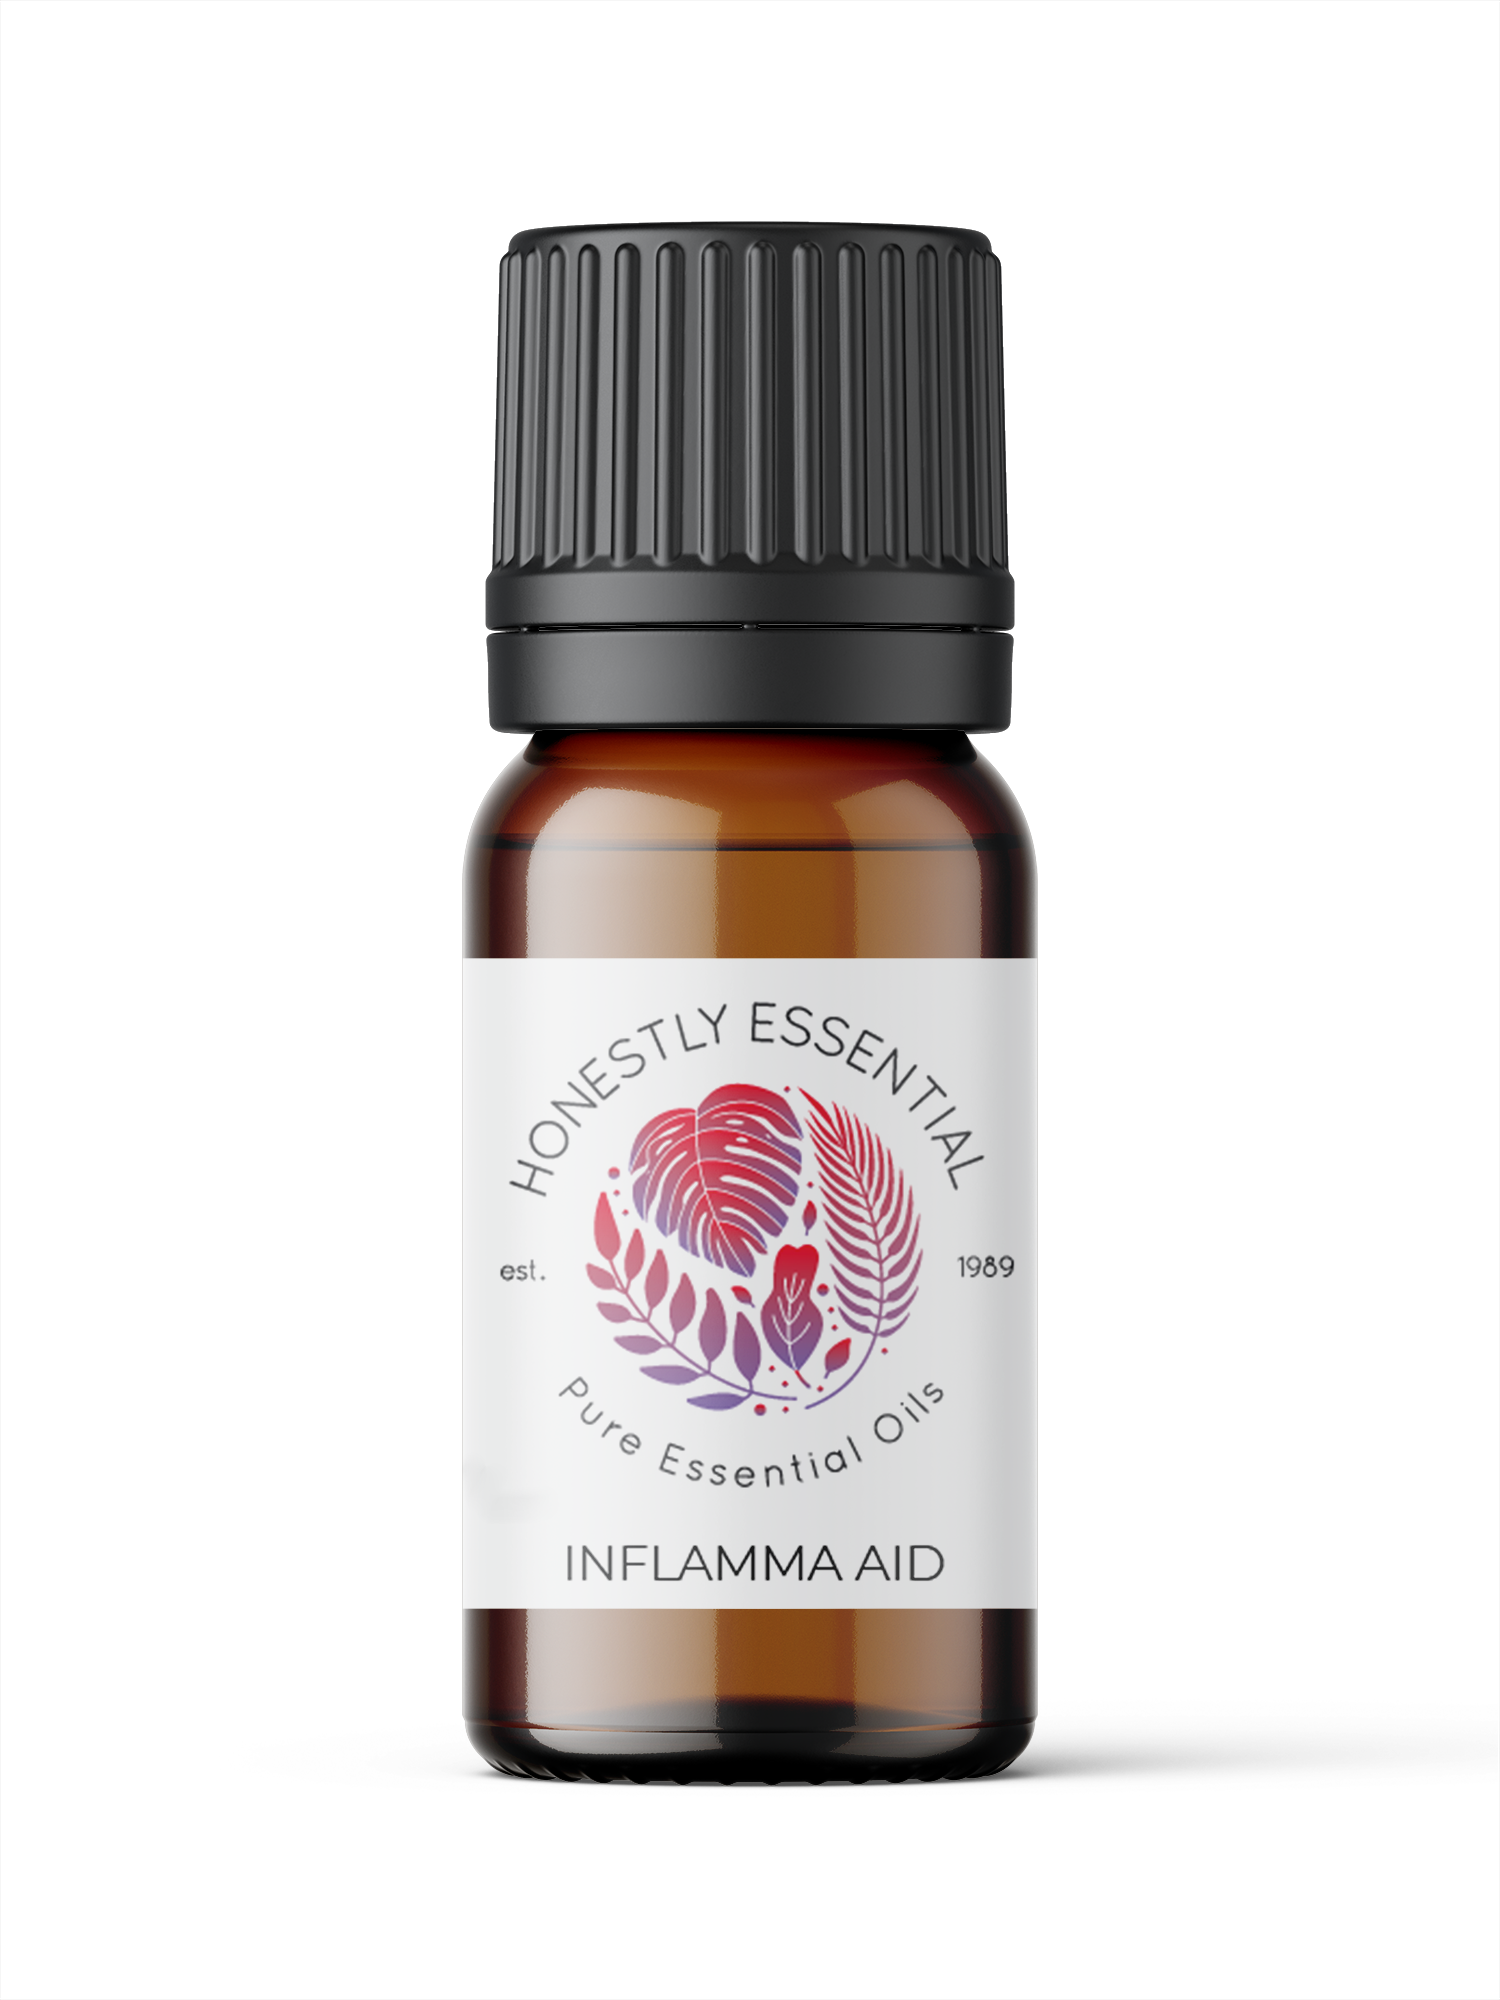 Inflamma Aid - Synergistic Blends | Honestly Essential Oils inflammation, inflammation relief, pain, pain reliever, synergistic, synergistic blend